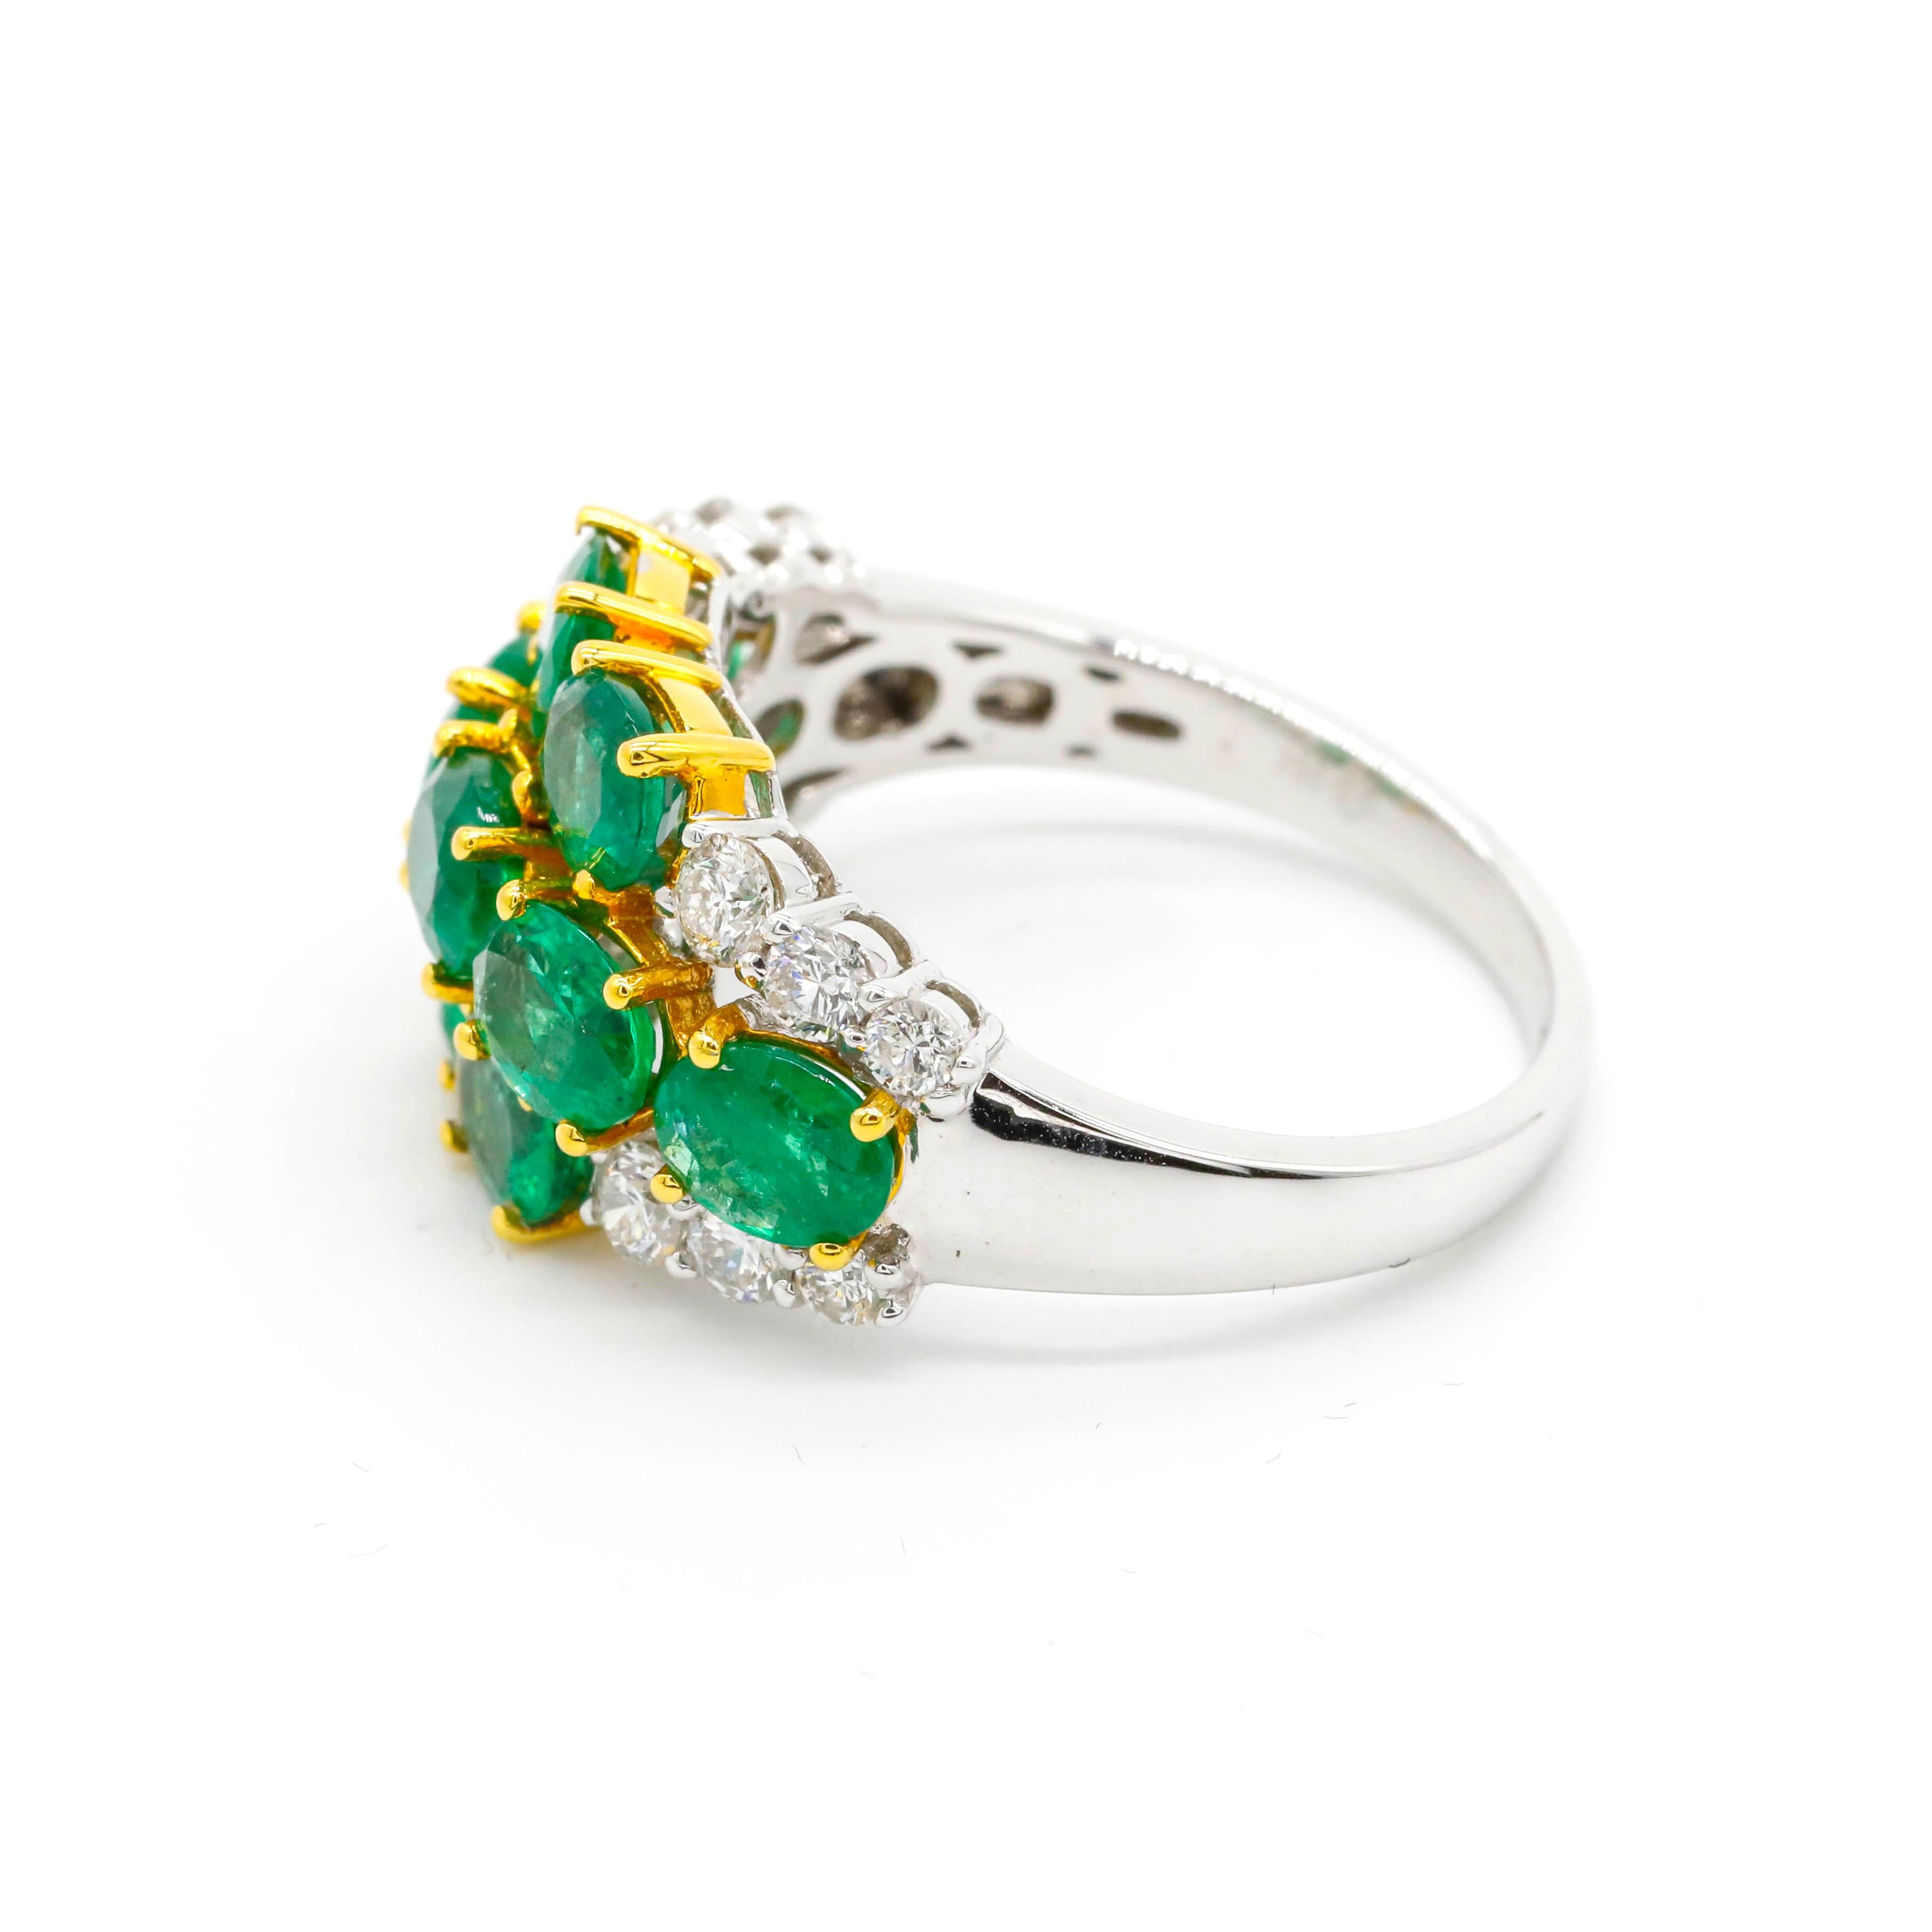 2.76 ct Oval Emerald and 0.53 ct Diamond Accent Floral Ring in 18k Two-Tone Gold

A glamorous addition to your jewelry collection. Accents high-quality diamonds hug and embrace oval-shaped vivid green emeralds, creating mesmerizing flower design.